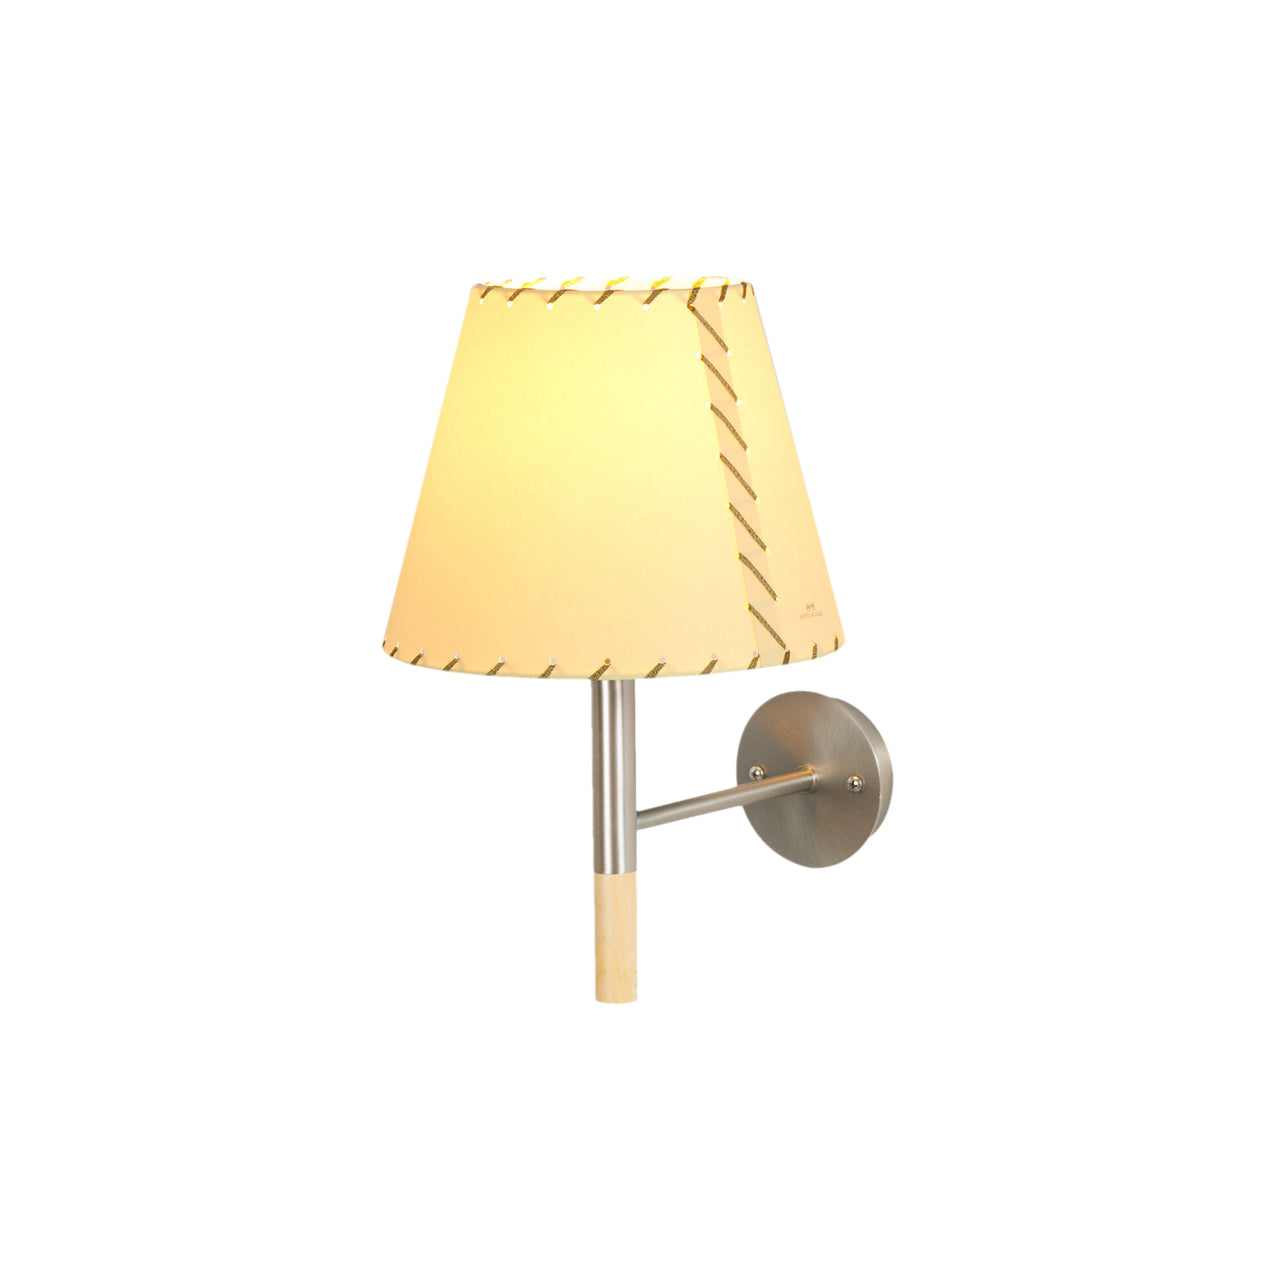 BC Wall Lamp: BC2 + Stitched Beige Parchment